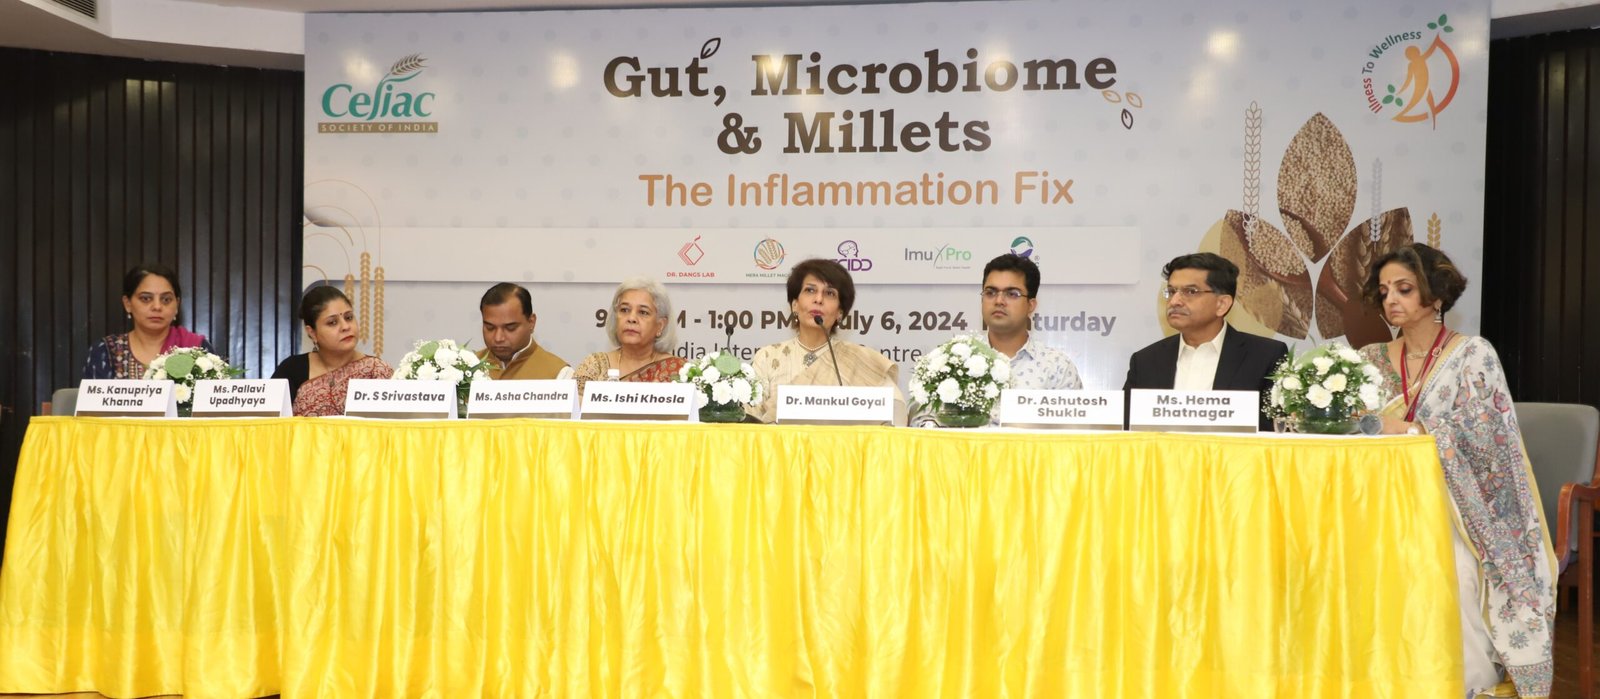 Gut, Microbiome & Millets: The Inflammation Fix